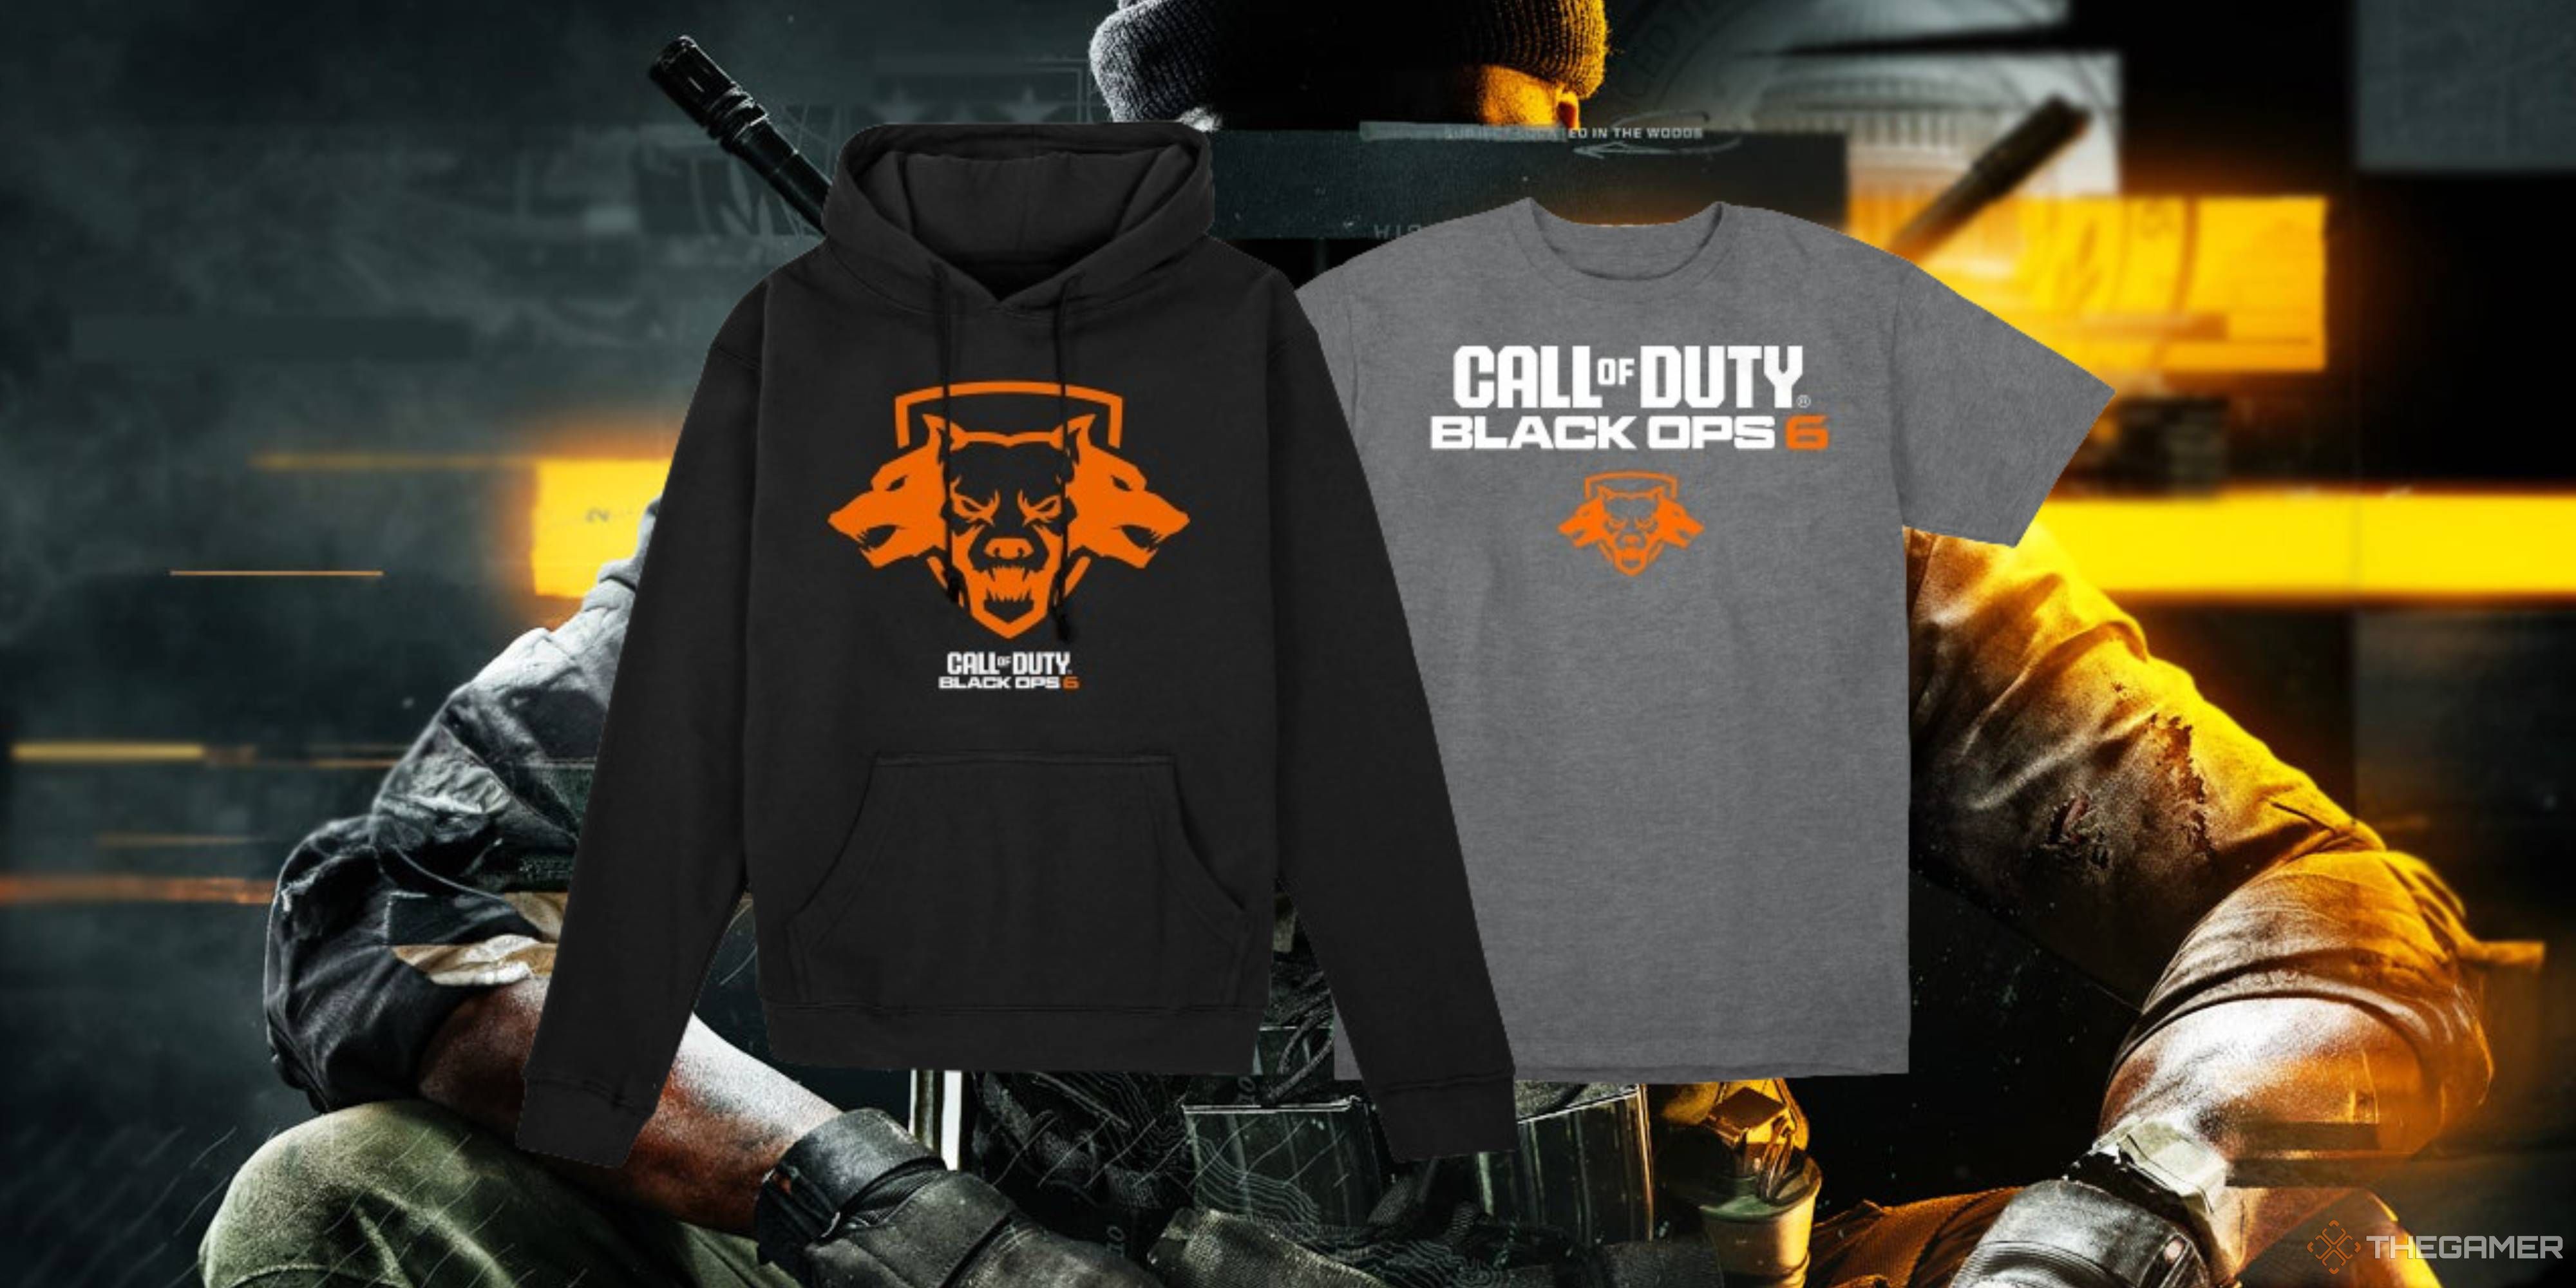 call of duty black ops 6 hoodie and t-shirt